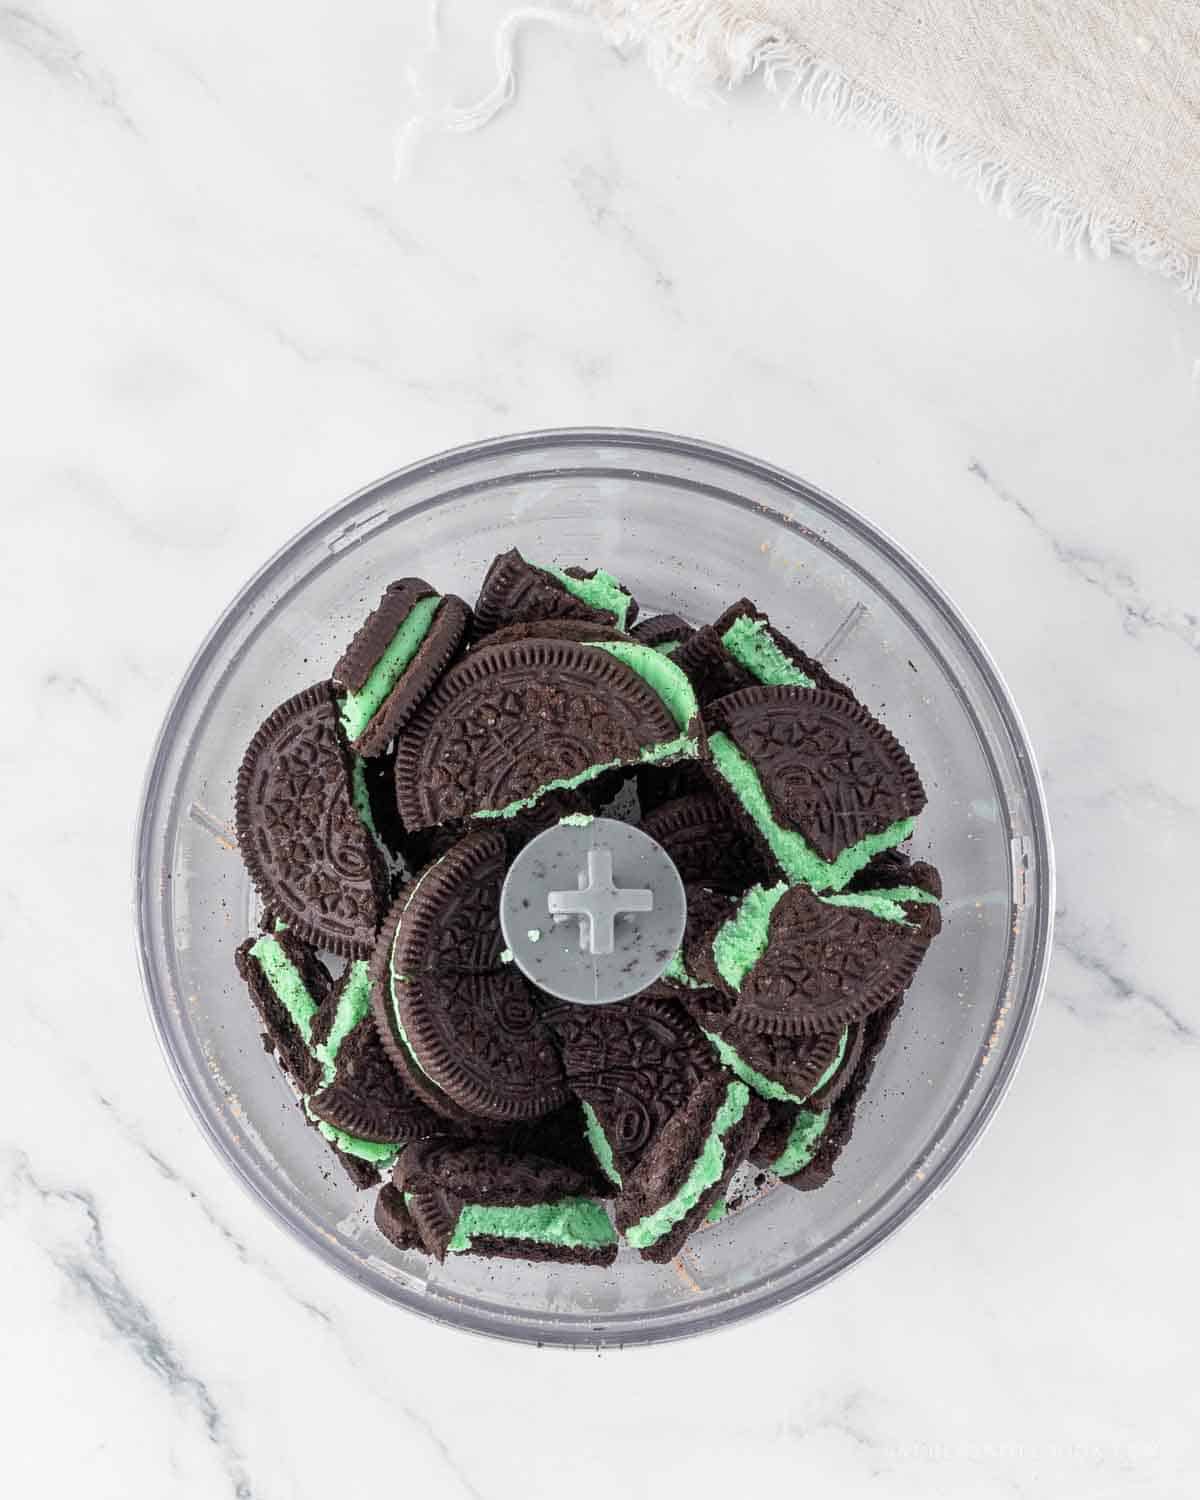 Mint oreos in a food processor before being ground up.